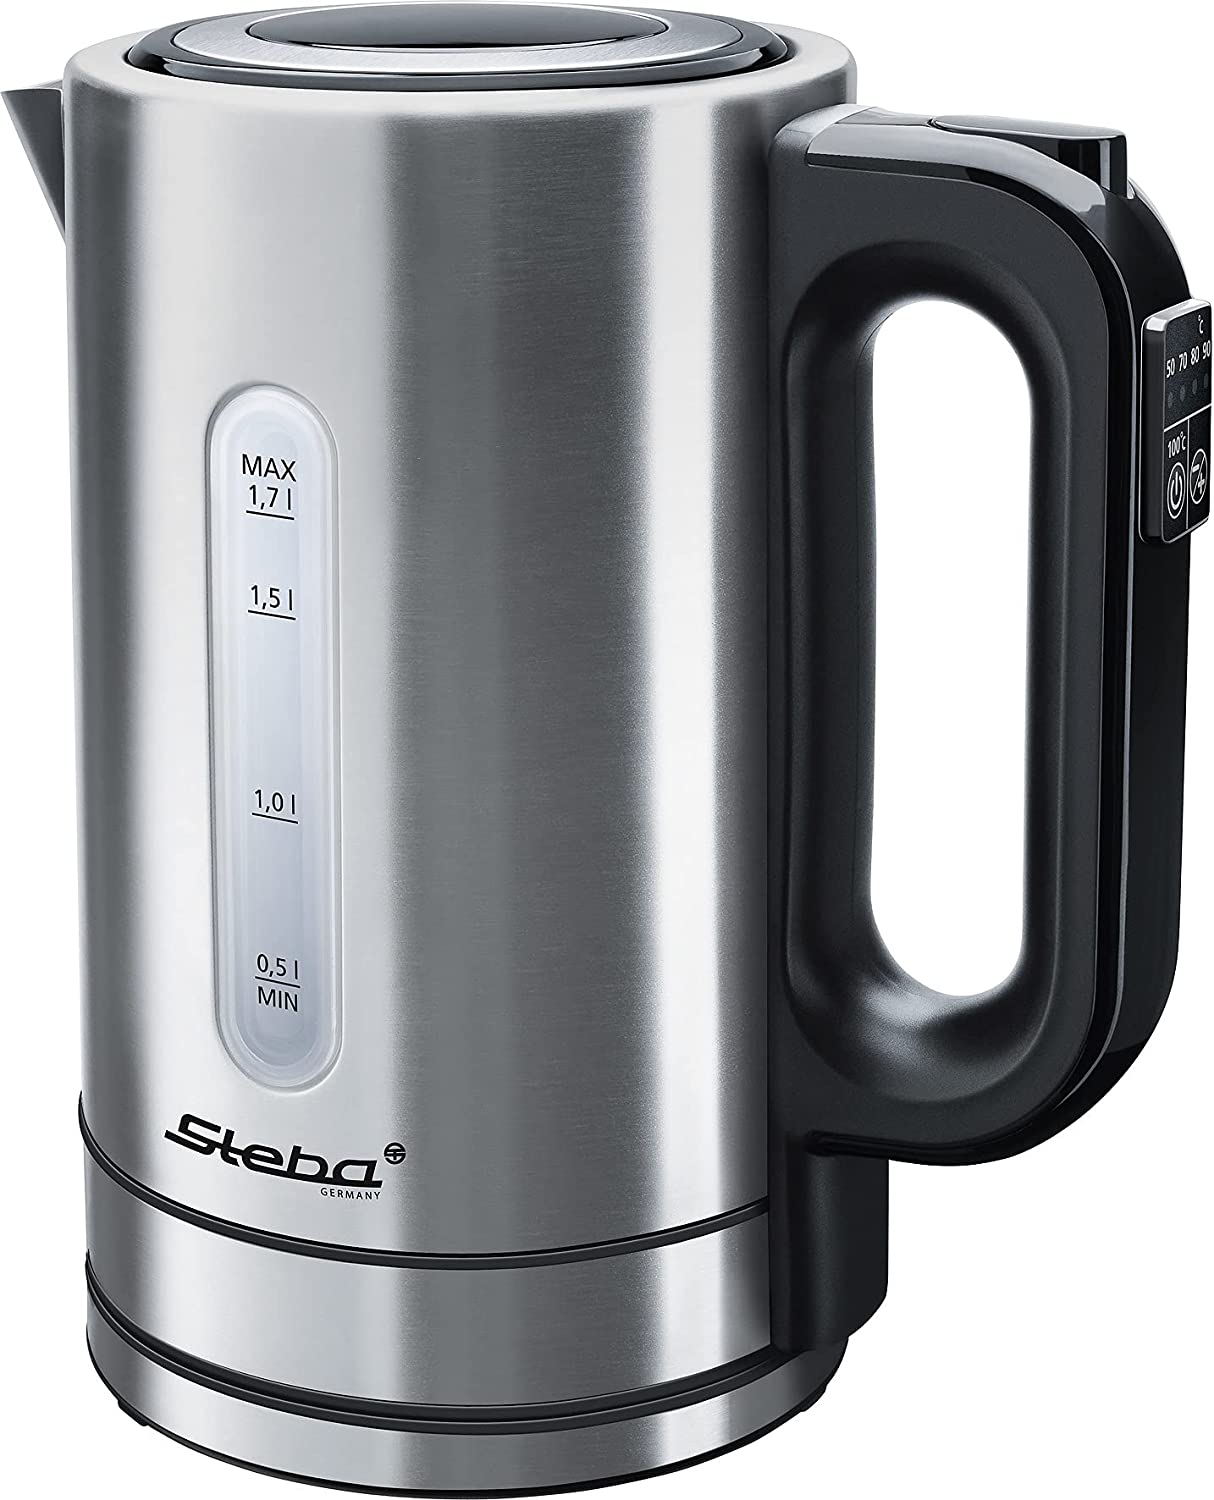 Steba WK 21 kettle (stainless steel), temperature adjustable: 50, 70, 80, 90, 100 °C with colour temperature display, 1.7 litre capacity, easy lid opening at the touch of a button, water level indicator